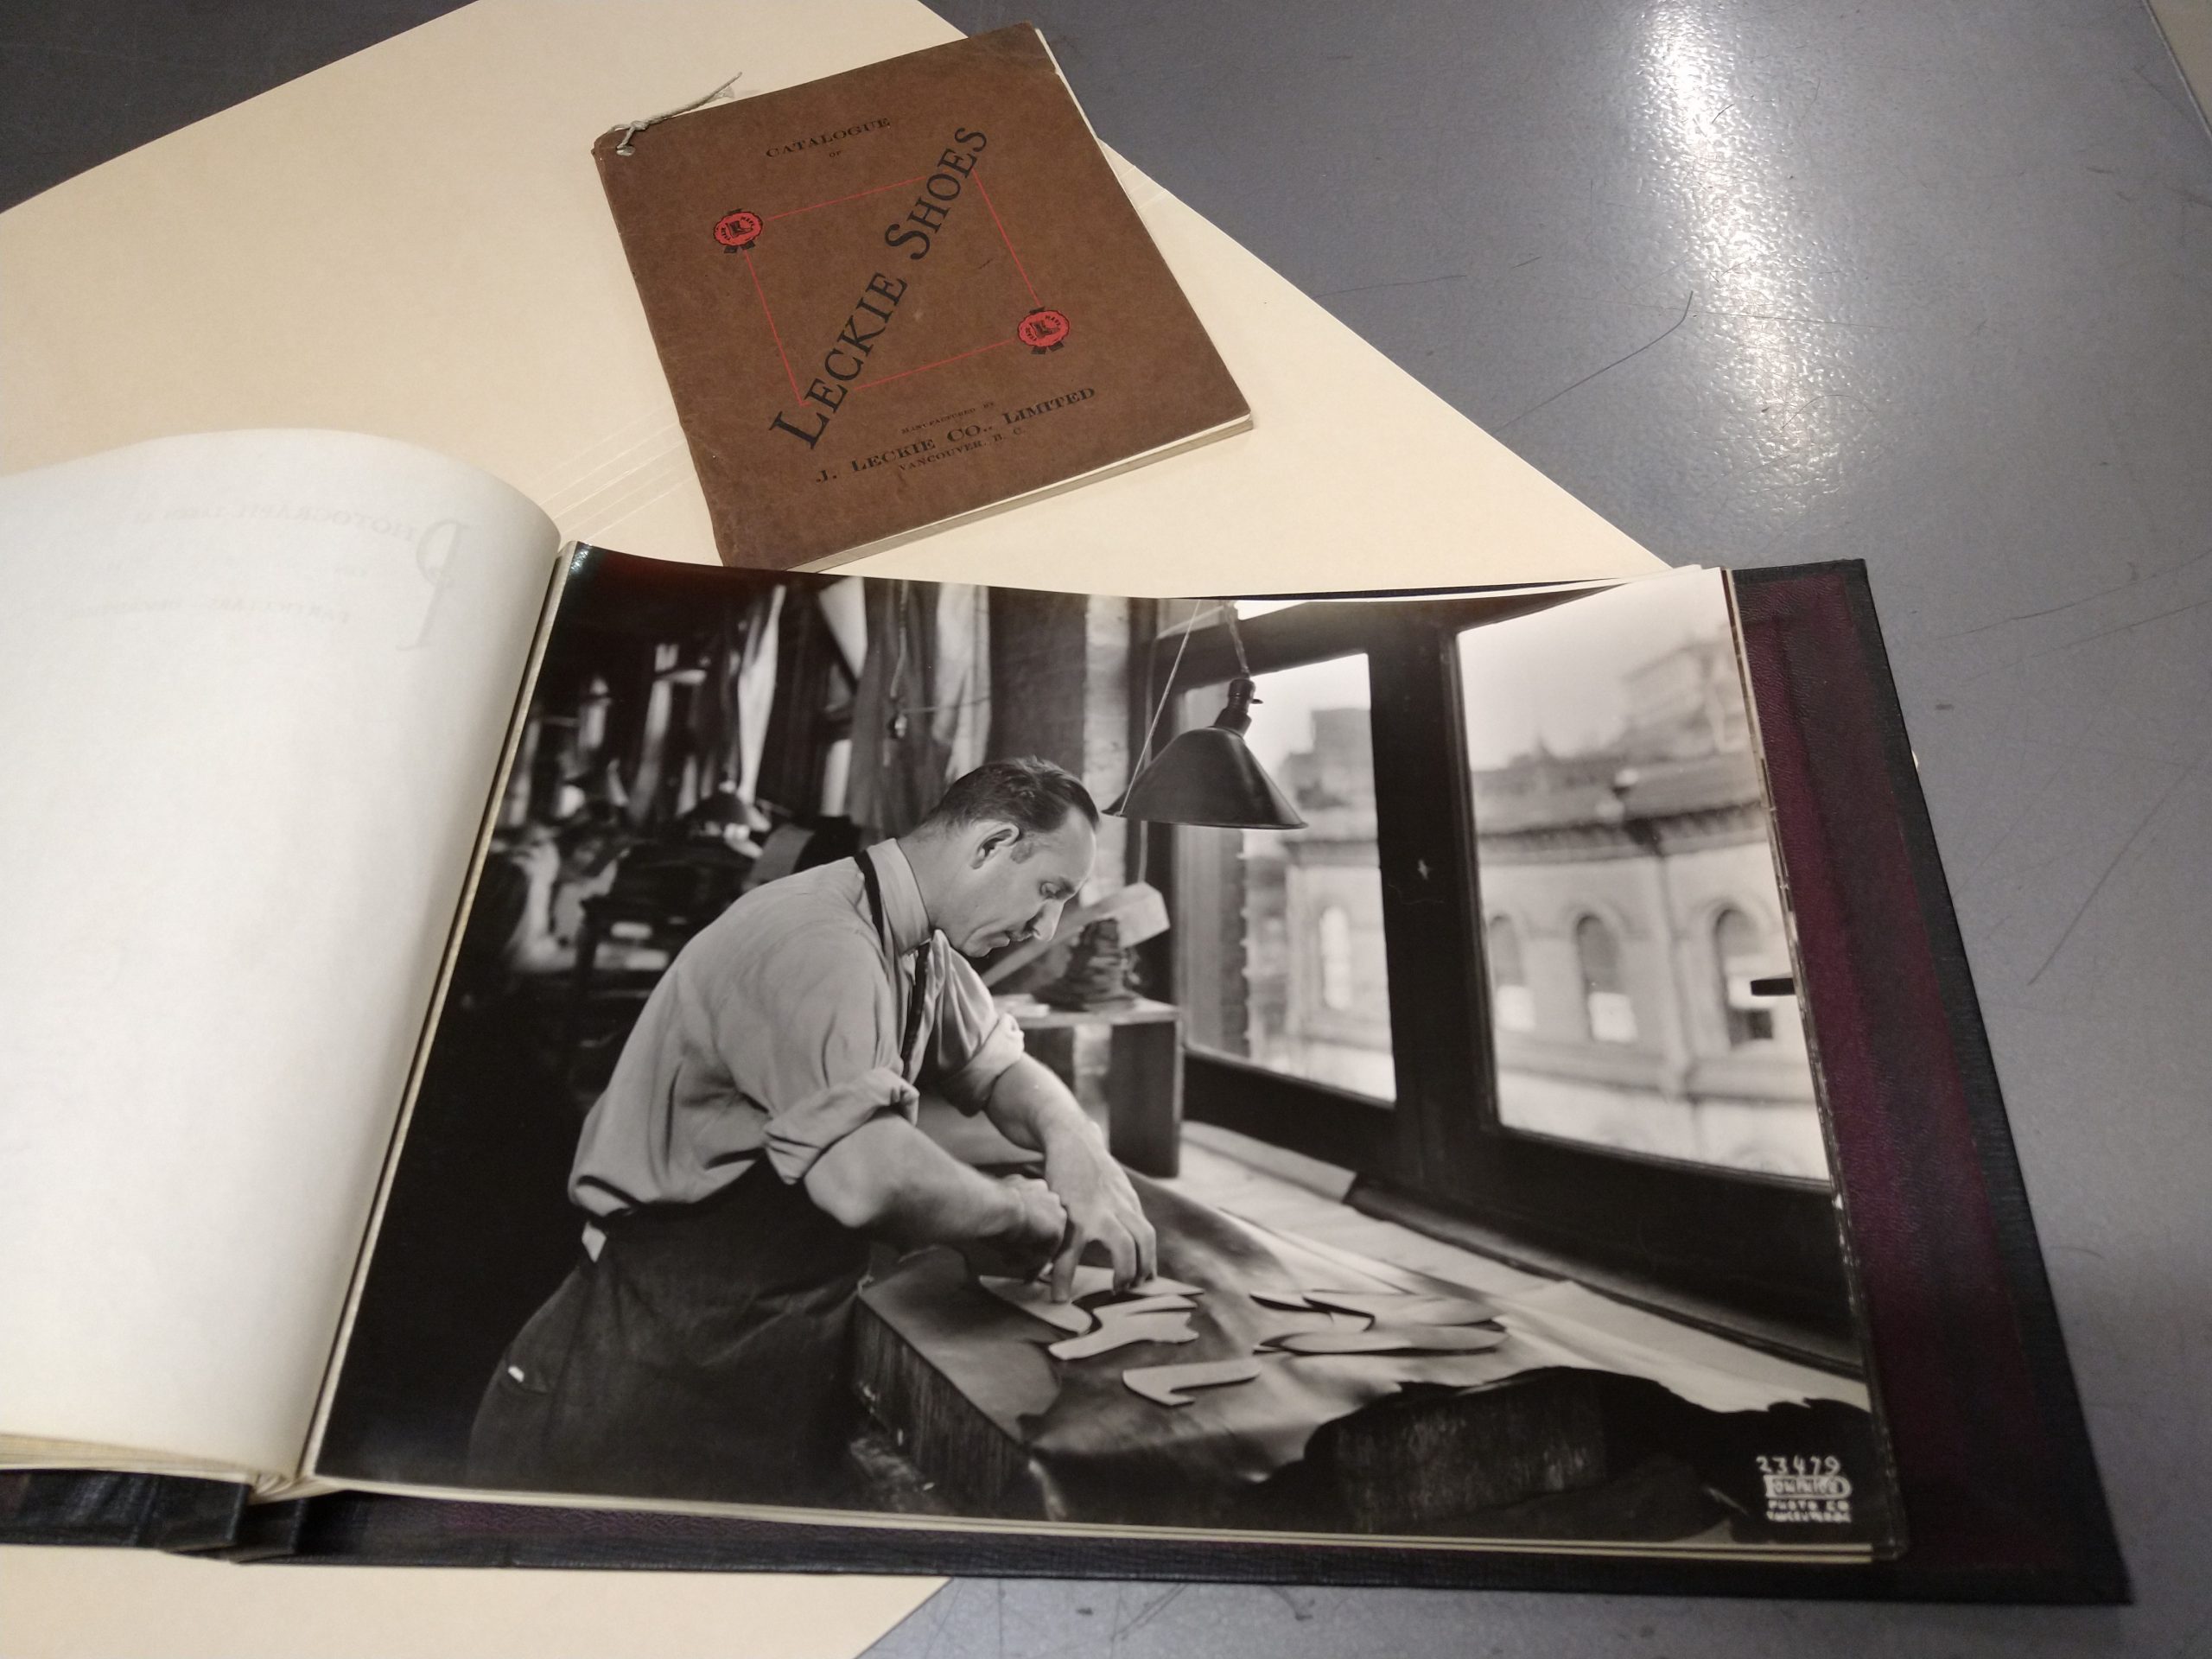 A photograph album and catalogue for the Leckie Shoe Company, ca. 1923, donated in 2019. Photo by Kira Baker.